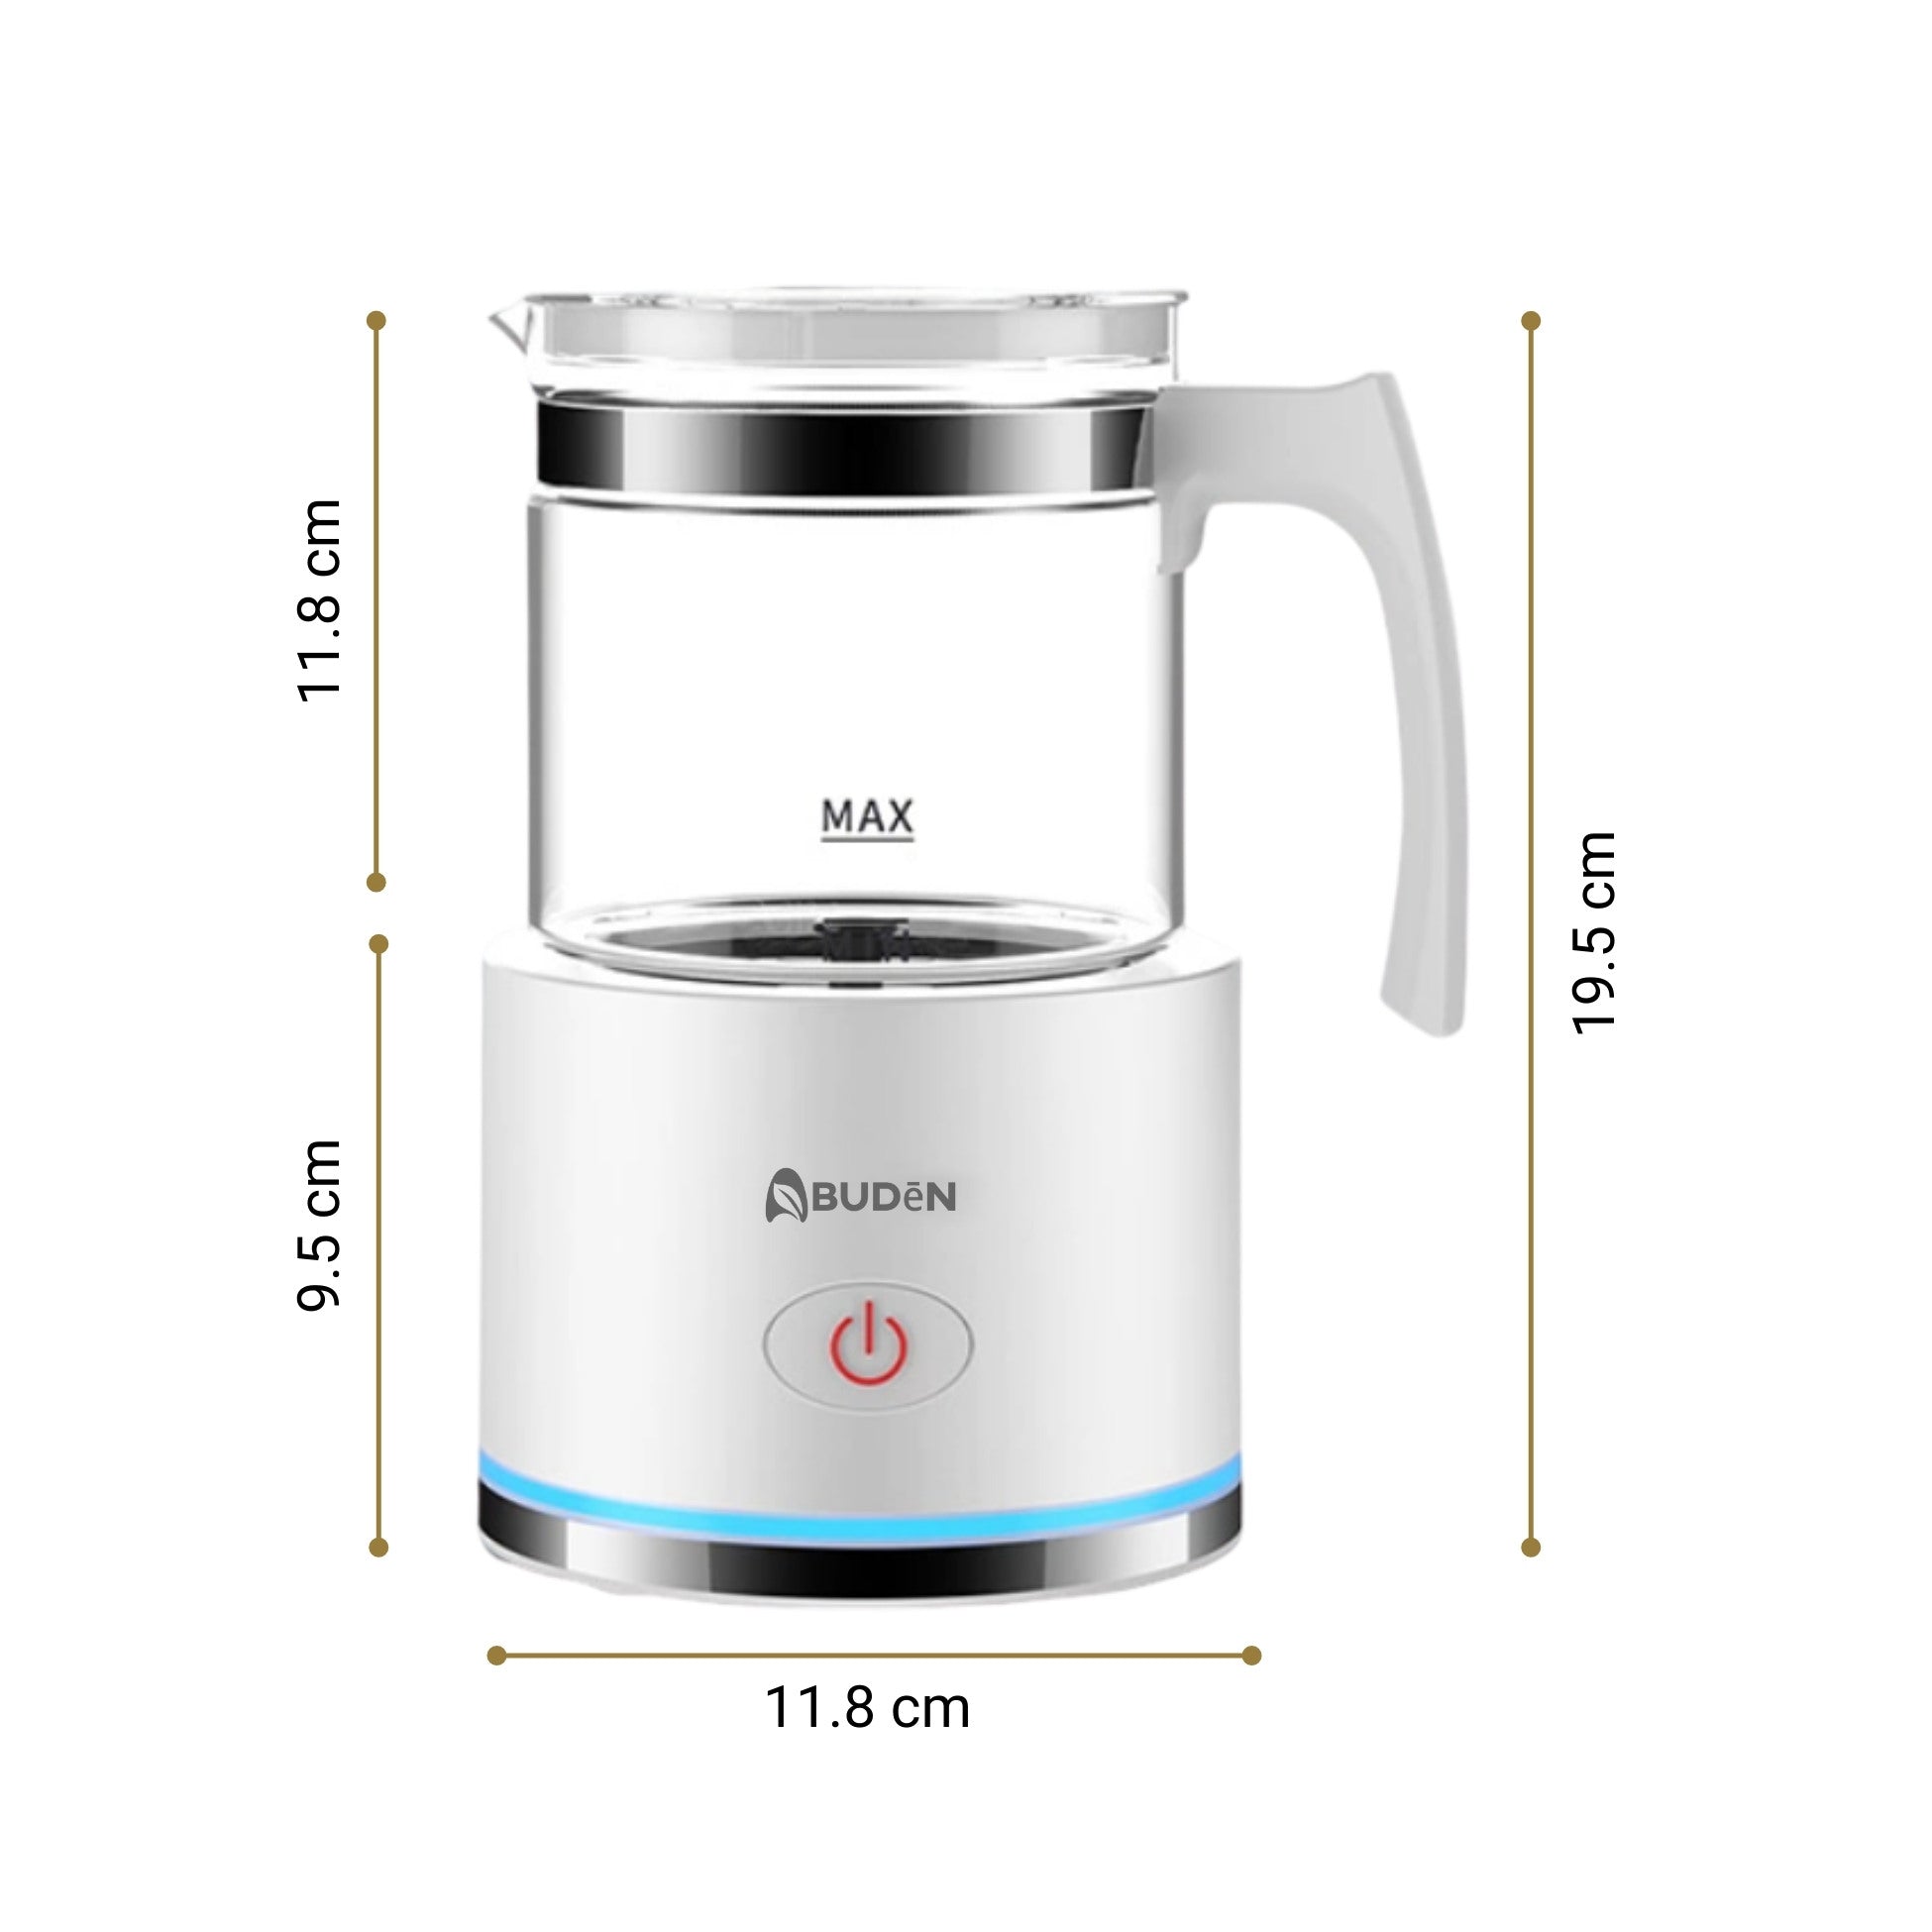 5 Best Electric Milk Frother Machine 